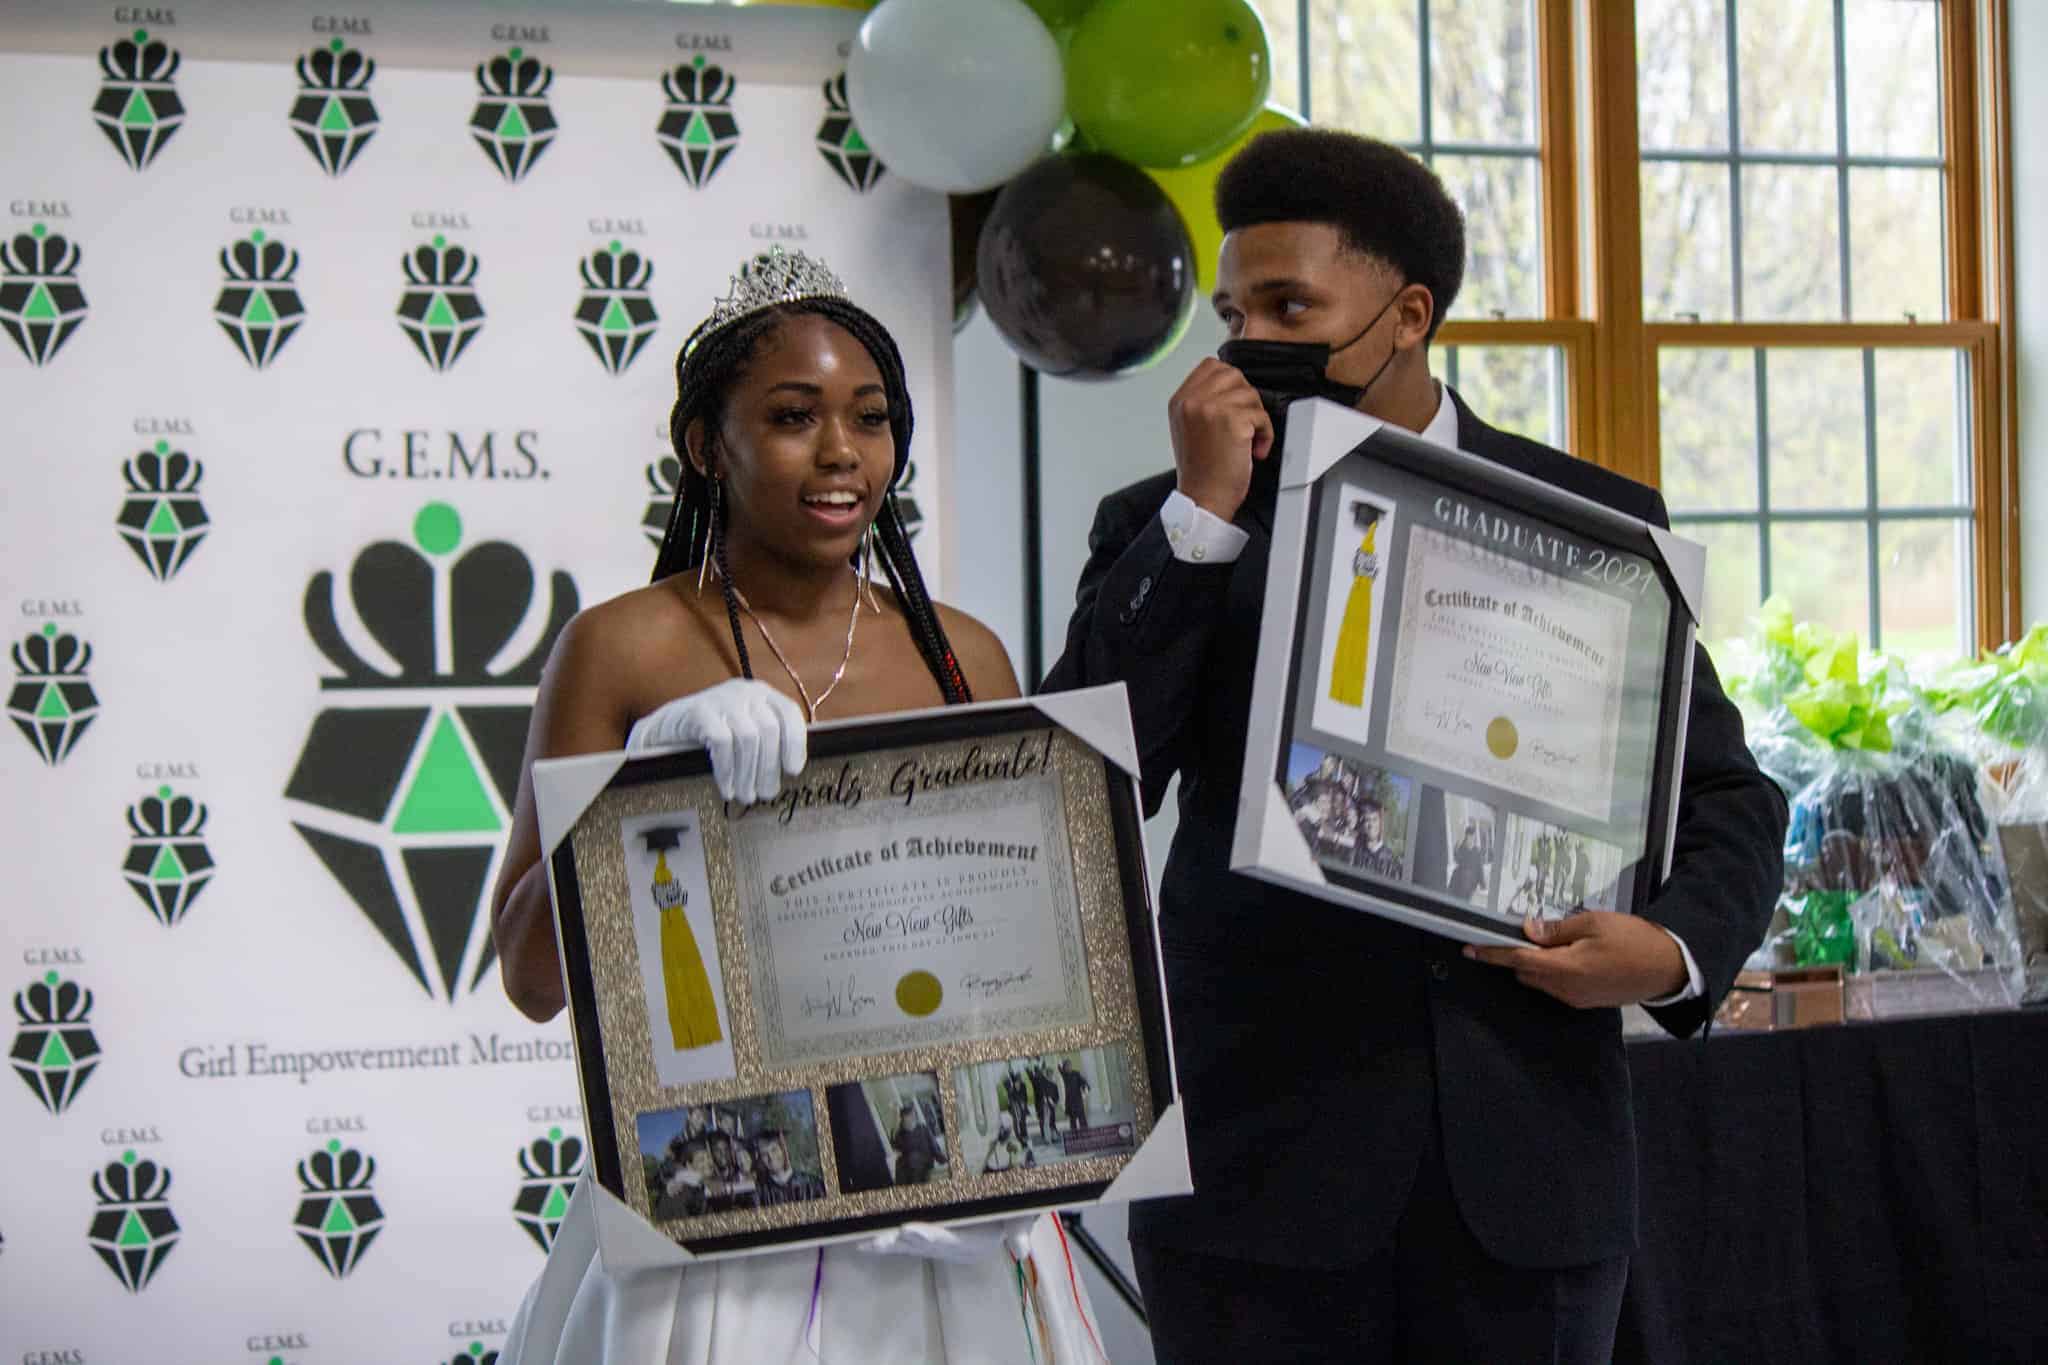 Two young people dressed very elegantly receive awards from their participation in the GEMS program.